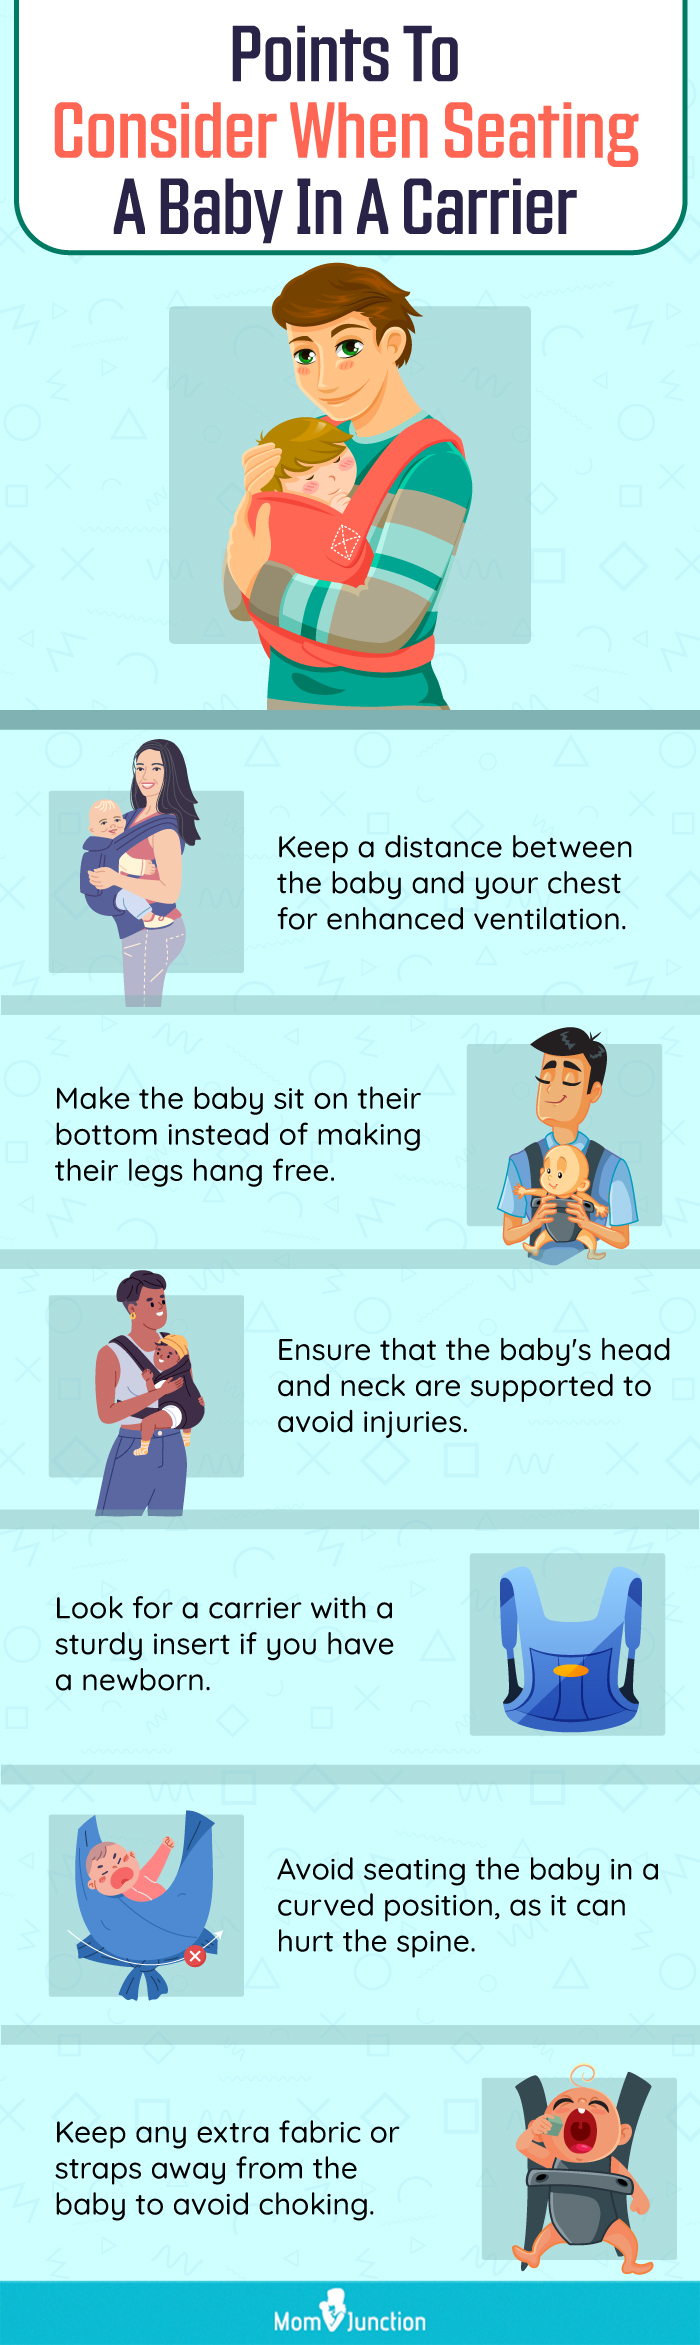 Points To Consider When Seating A Baby In A Carrier (infographic)